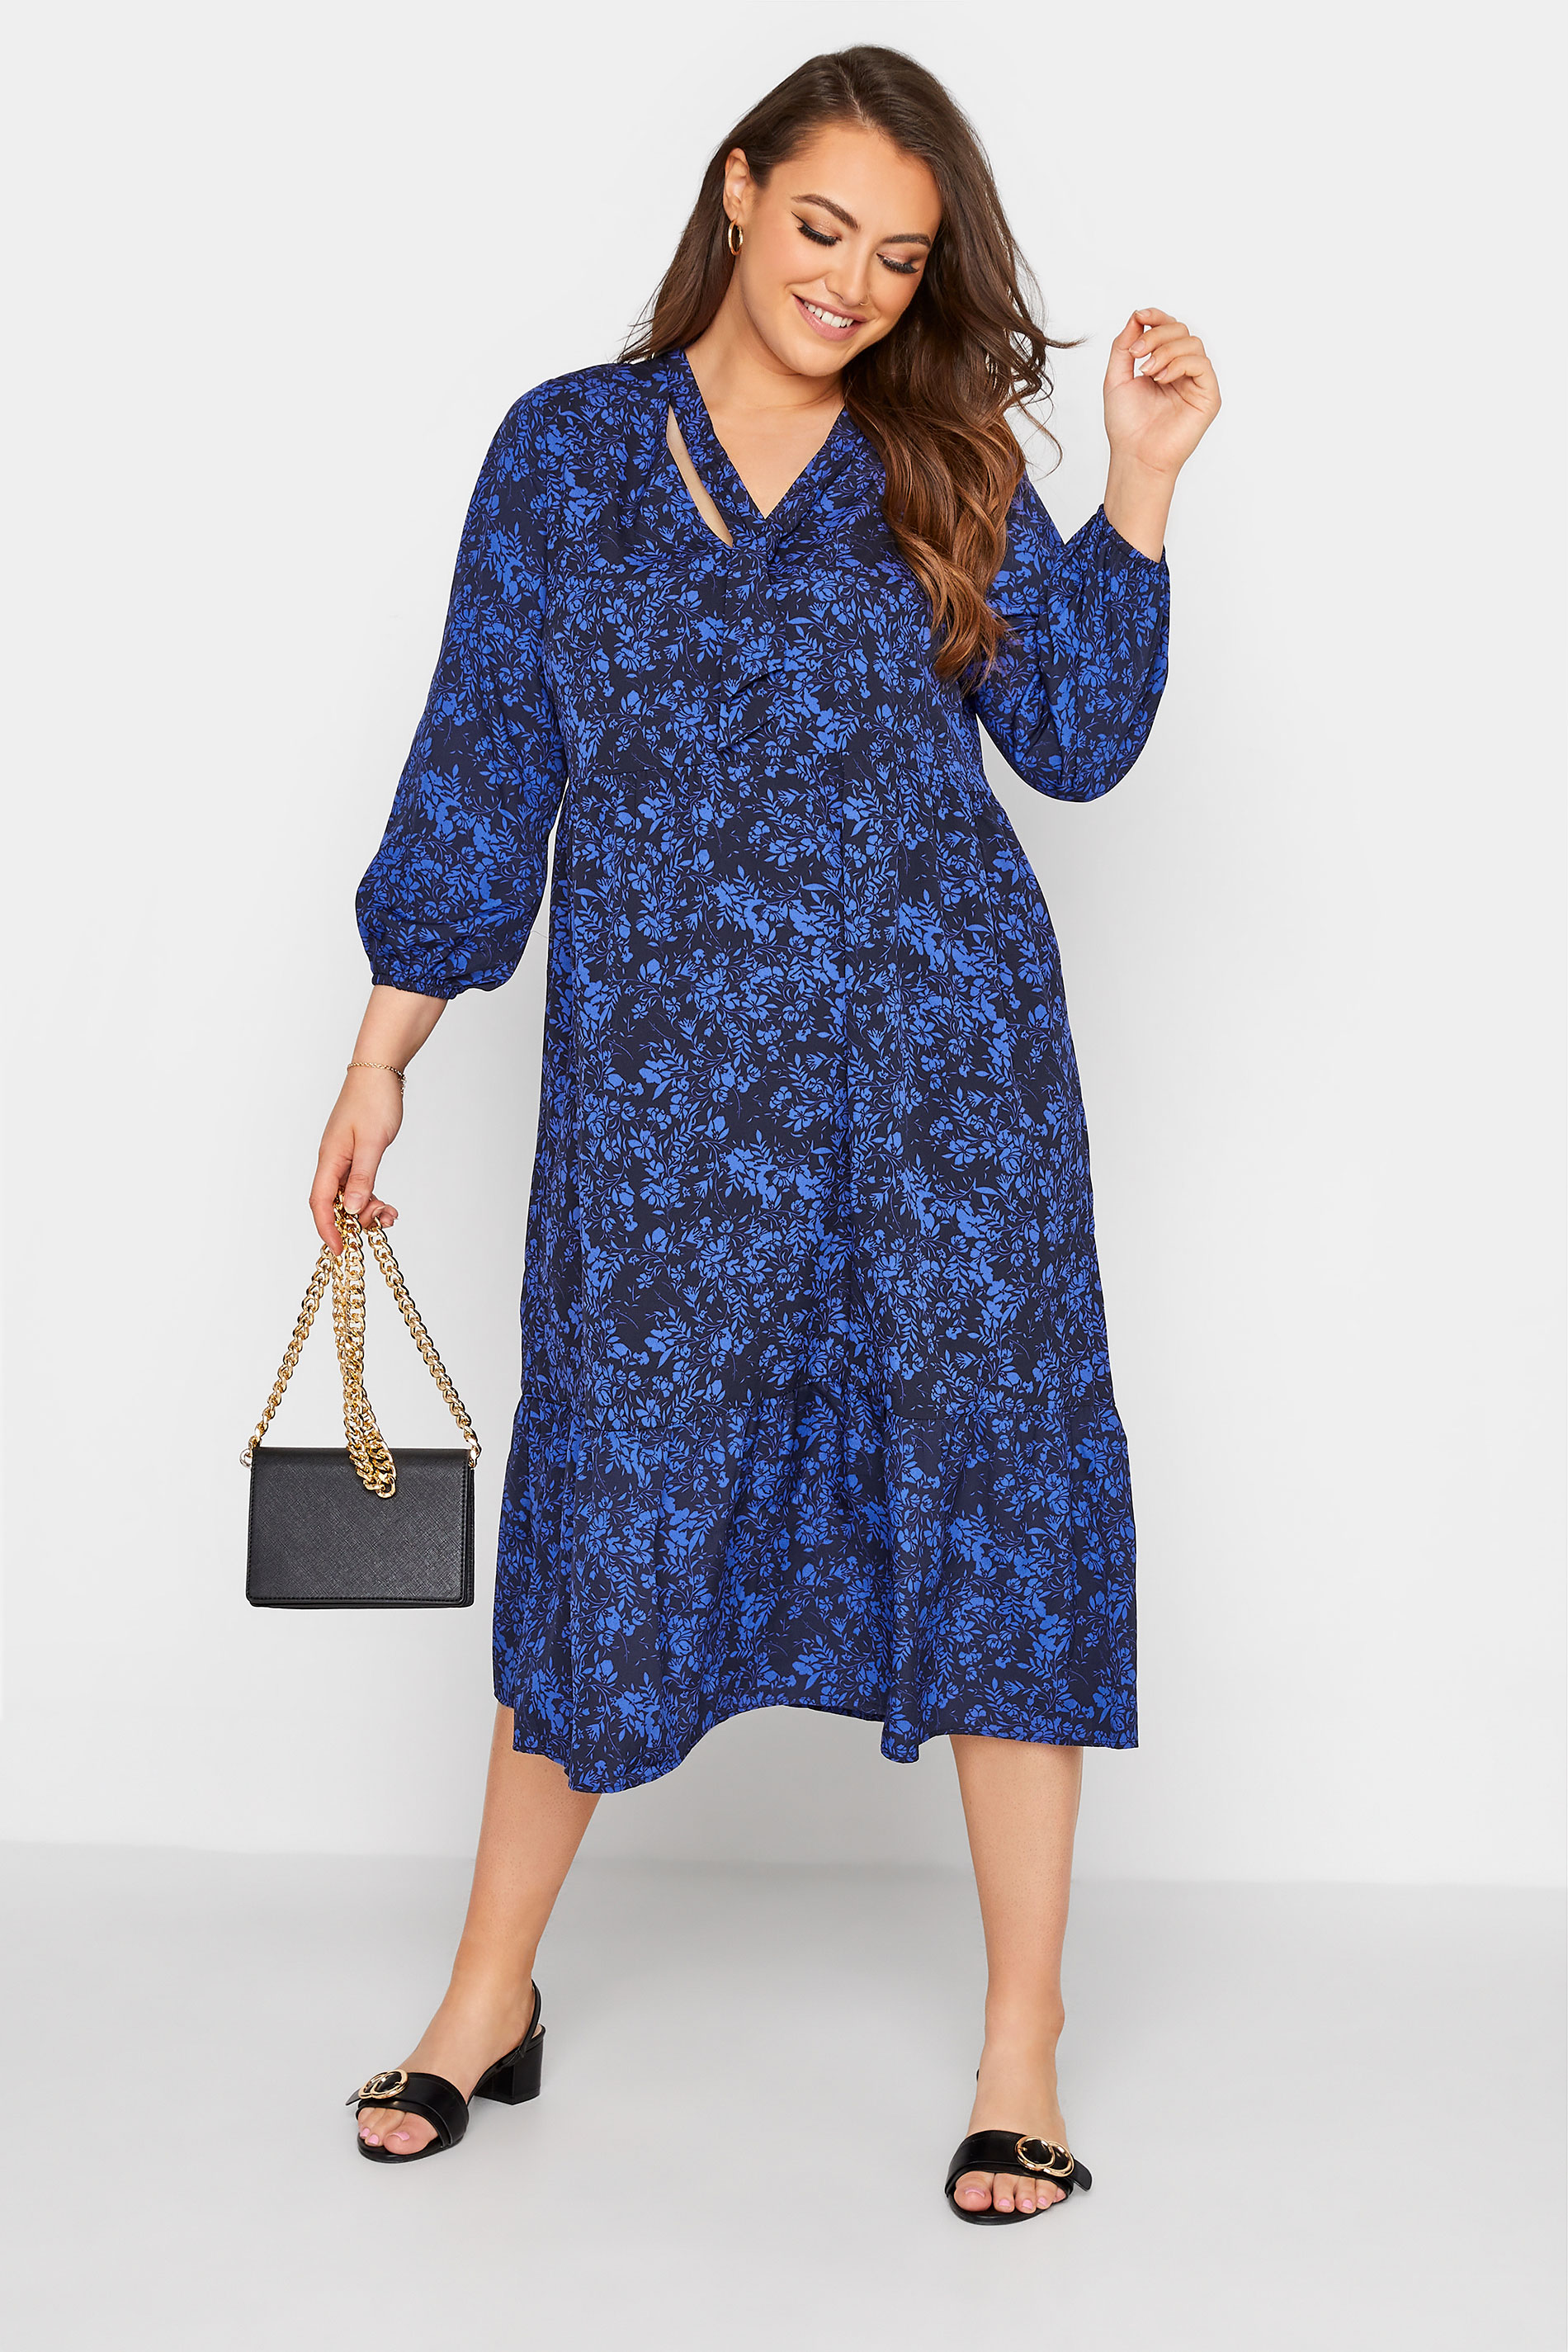 Robes Grande Taille Grande taille  Robes Mi-Longue | THE LIMITED EDIT - Robe Bleue Marine Midi Floral Smocké - WQ59809